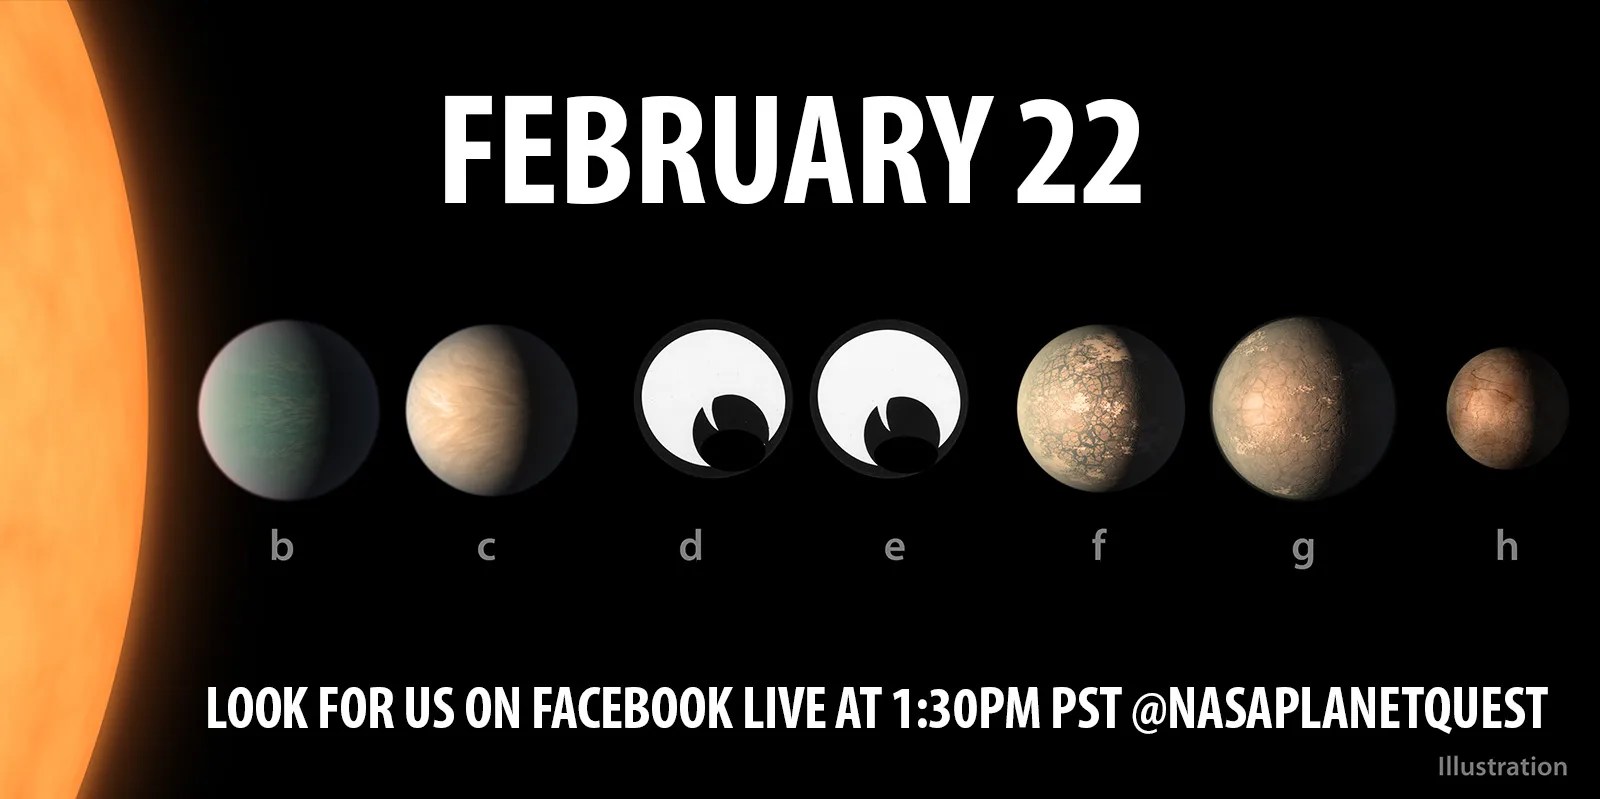 Ad says: Feb. 22, Look for us on Facebook Live at 1:30 p.m. PST @nasaplanetquest